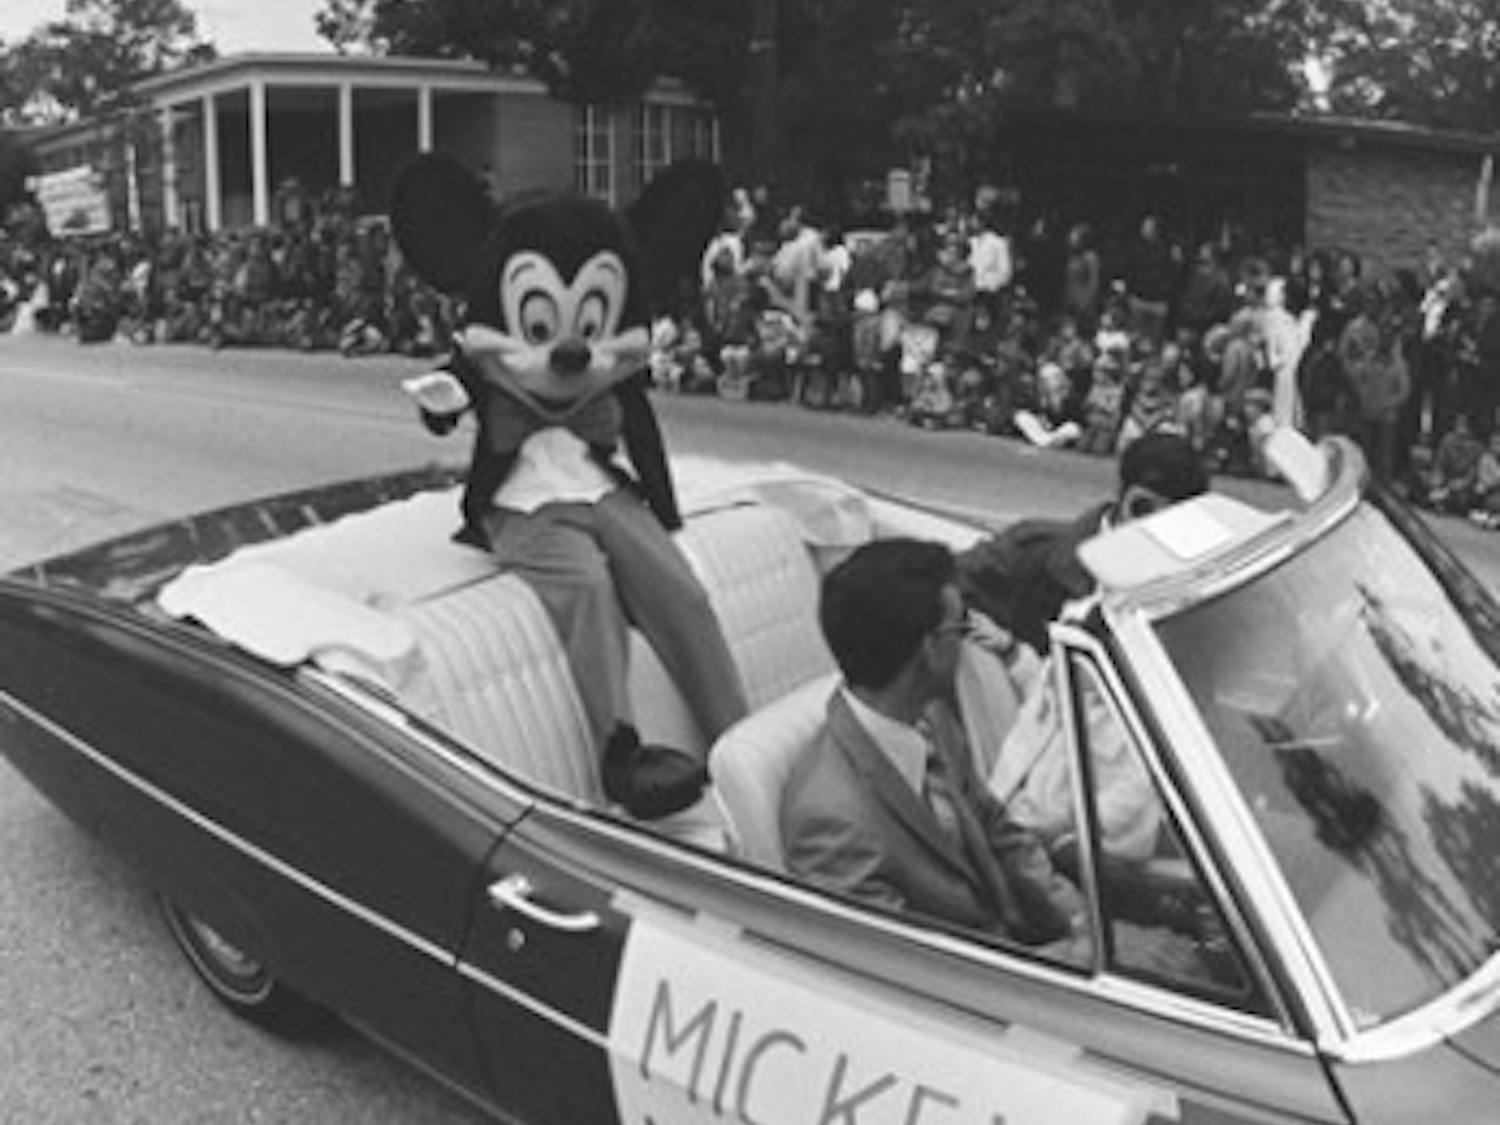 The parade was added to the lineup of festivities in the 1940s.